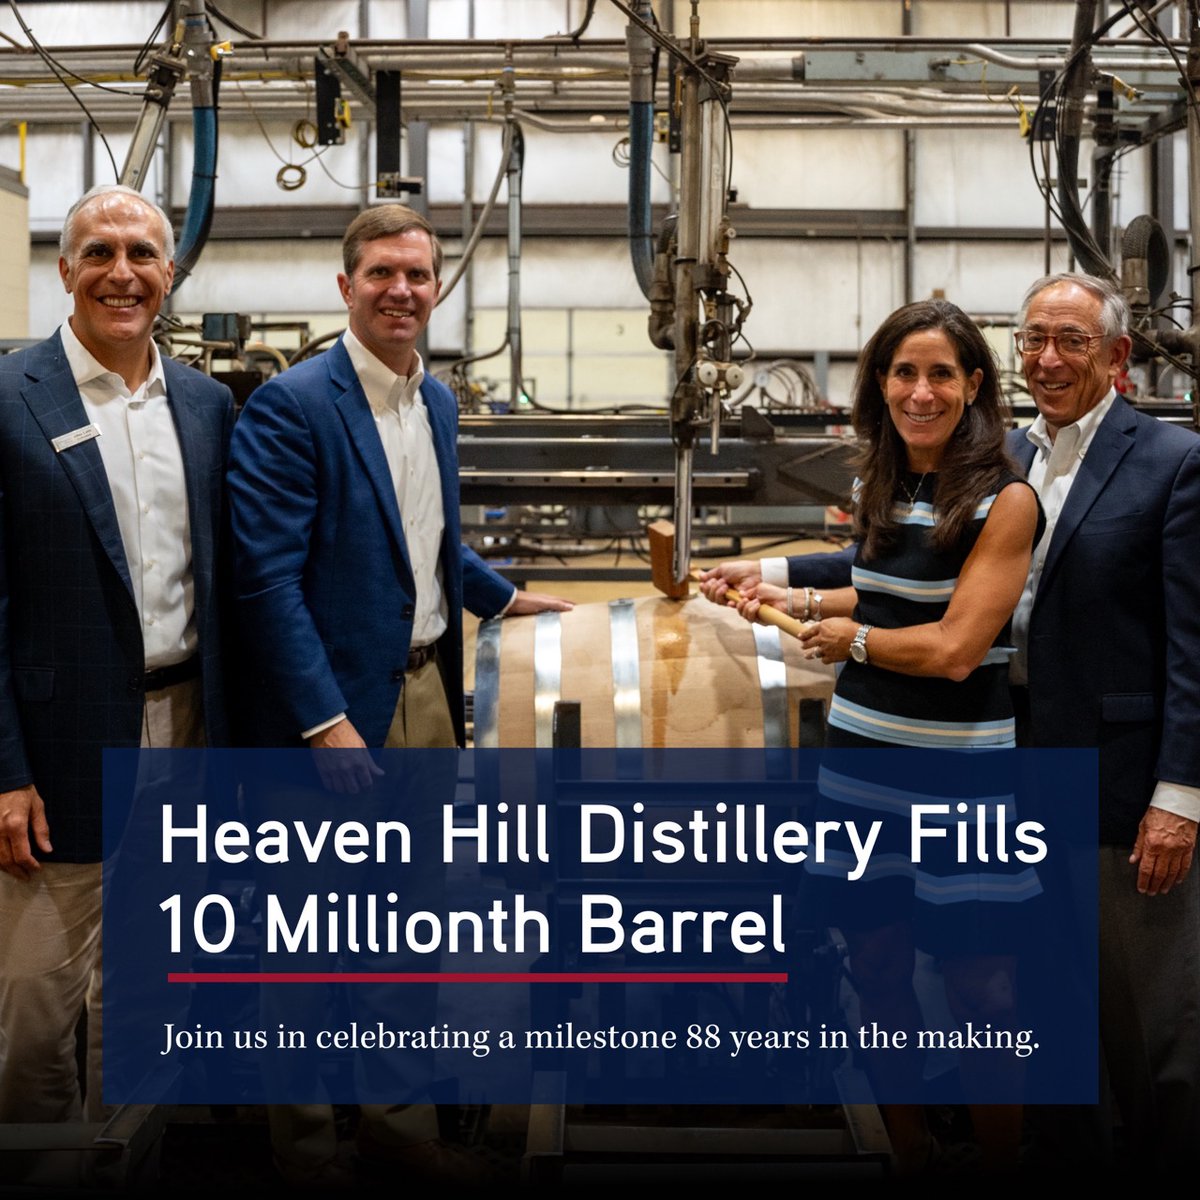 We recently hit a major milestone: filling our 10 millionth barrel! Read the blog to find out how we achieved this and learn some whiskey trivia. bit.ly/48foltc